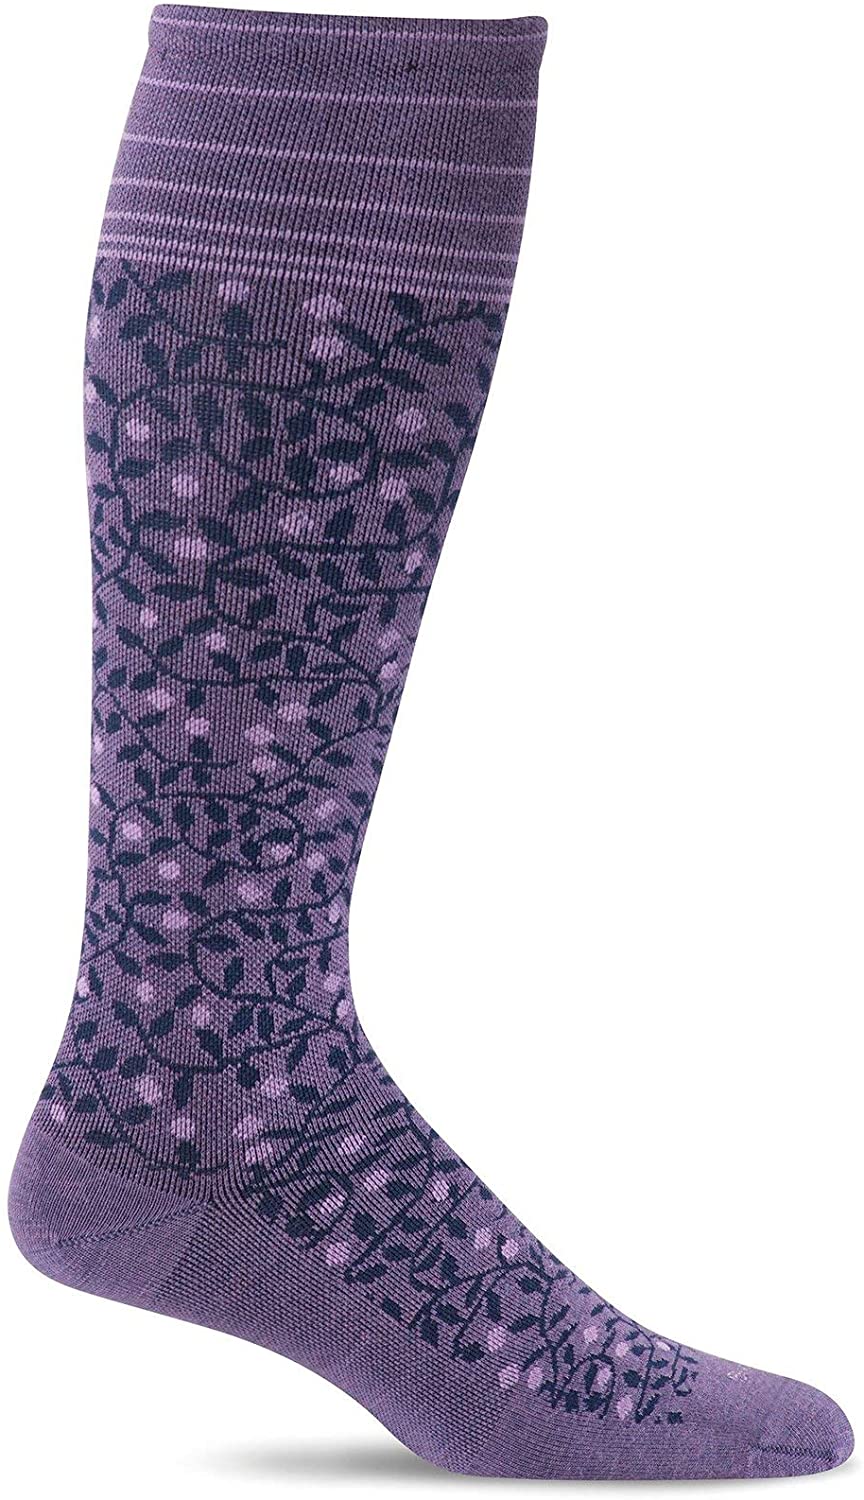 Sockwell Women's New Leaf Firm Graduated Compression Sock in Plum from the side